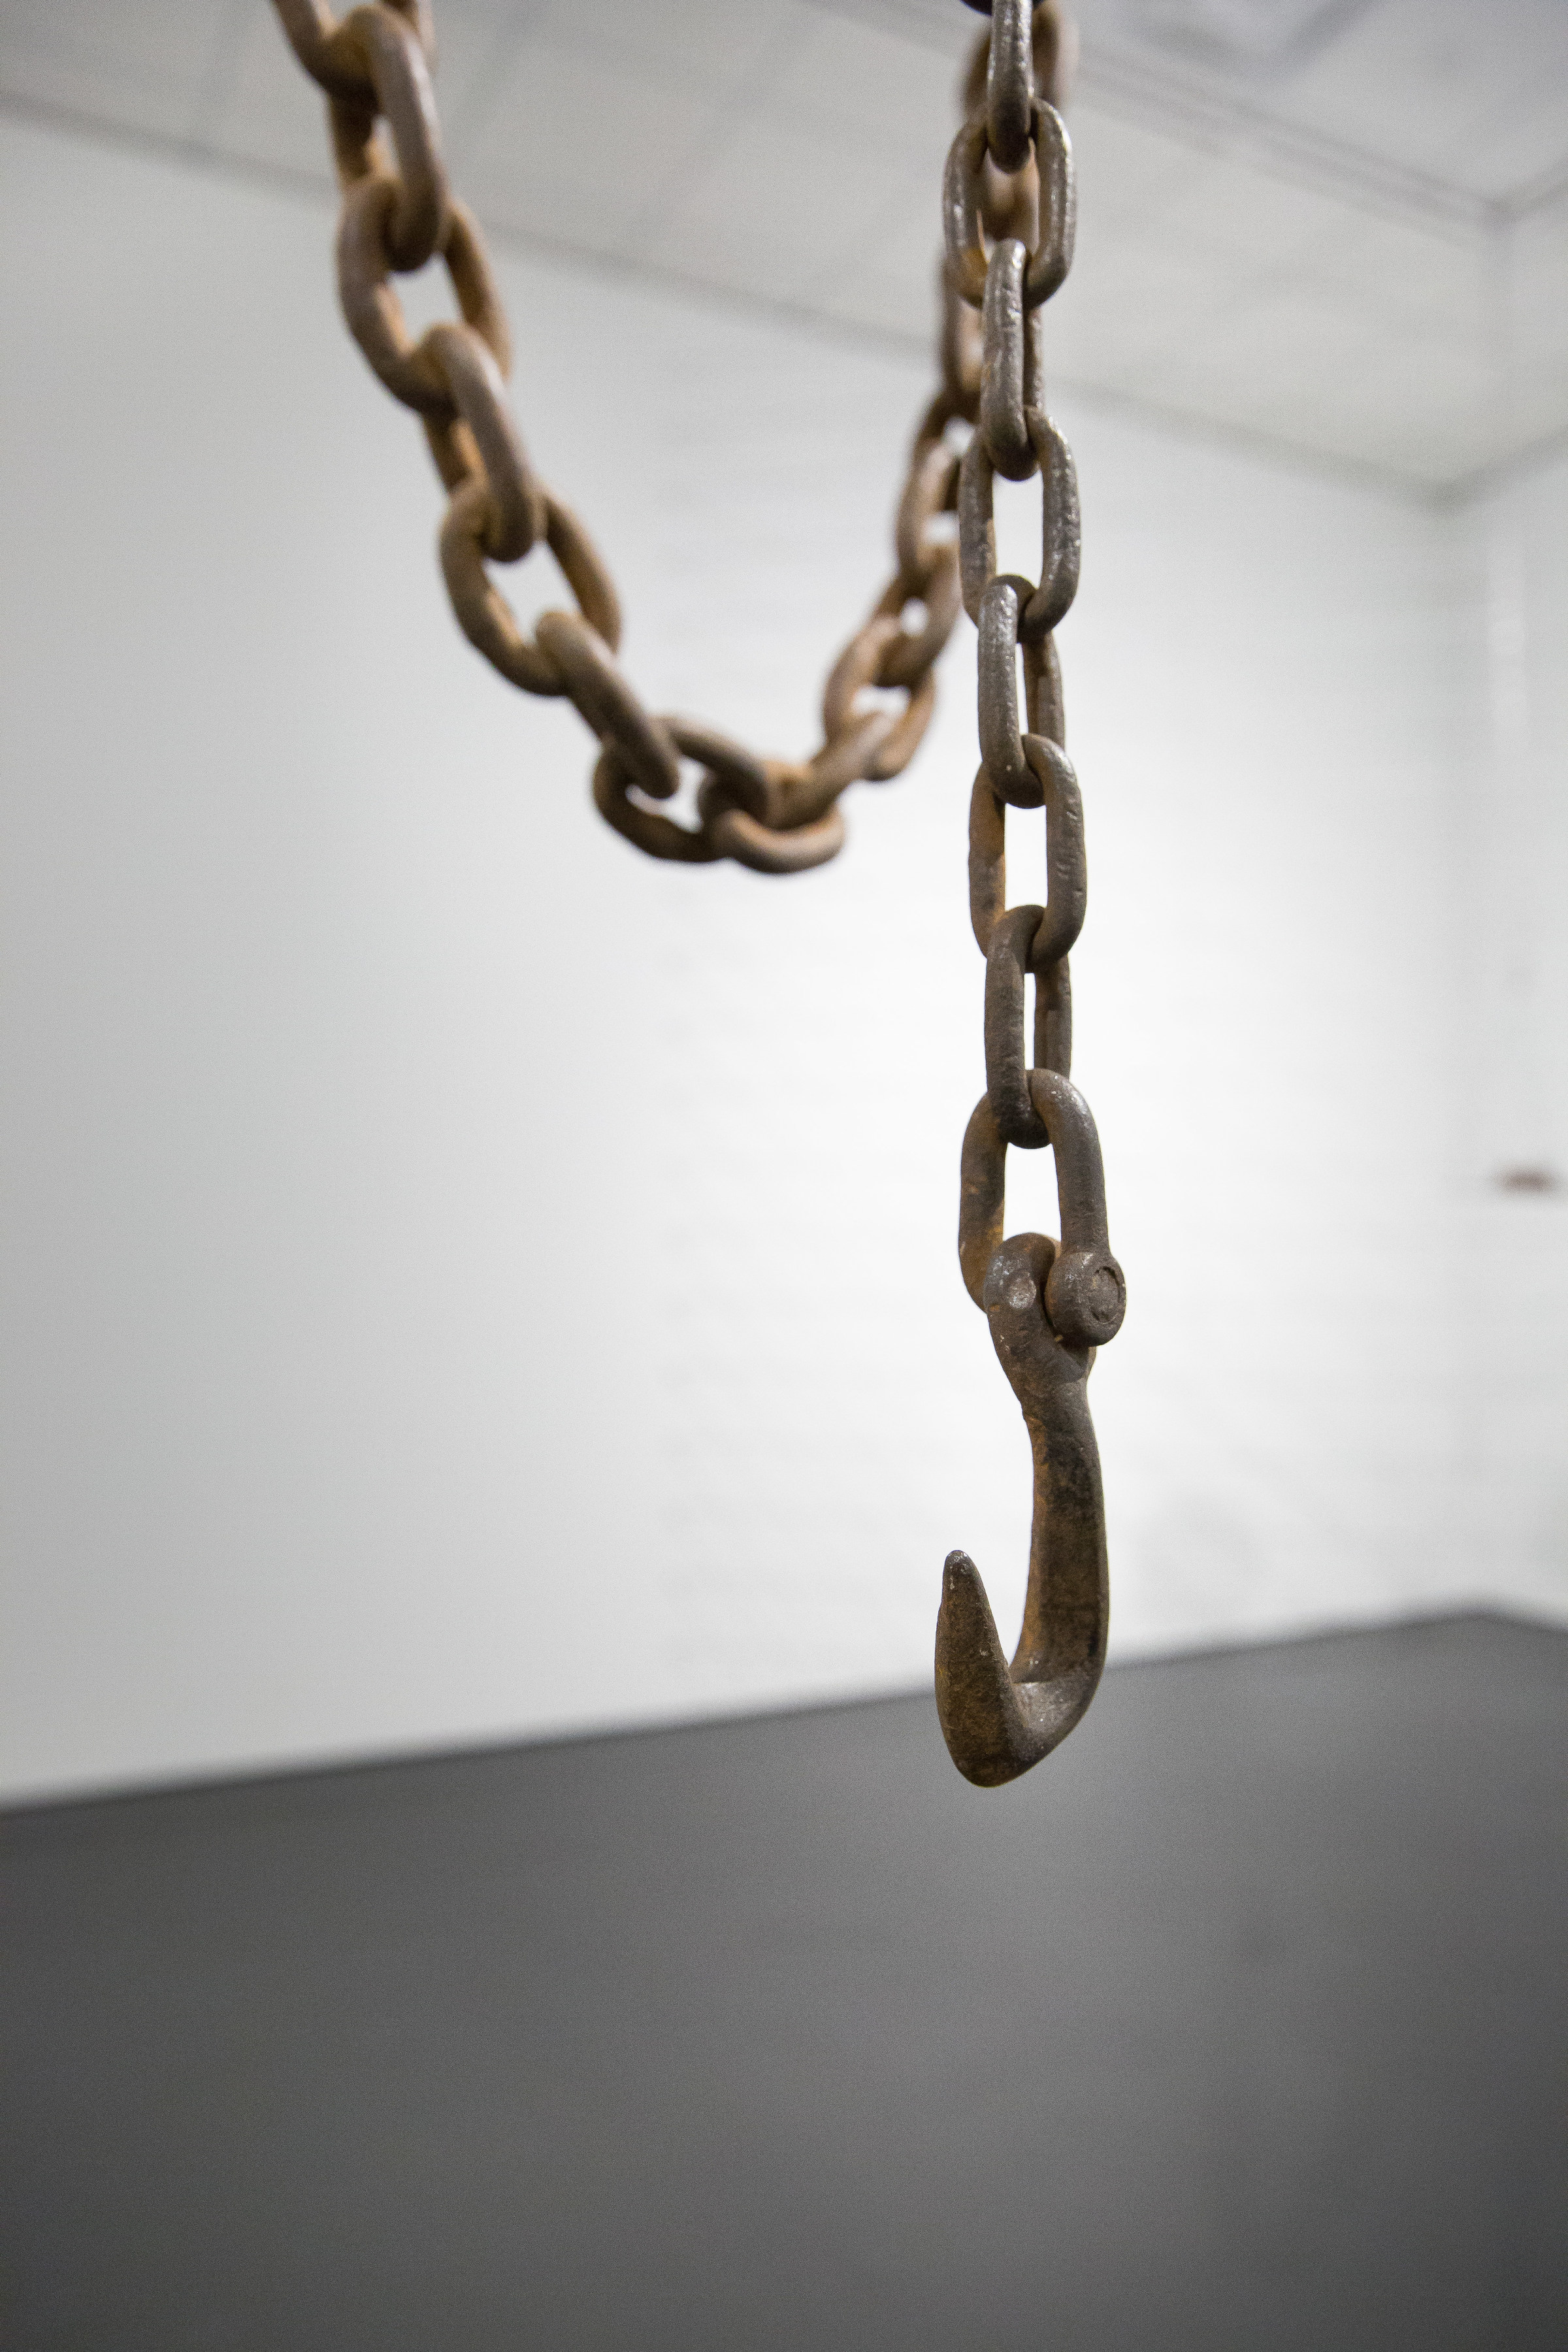 Agricole, detail, 2016, welded steel and chains, dimensions variable